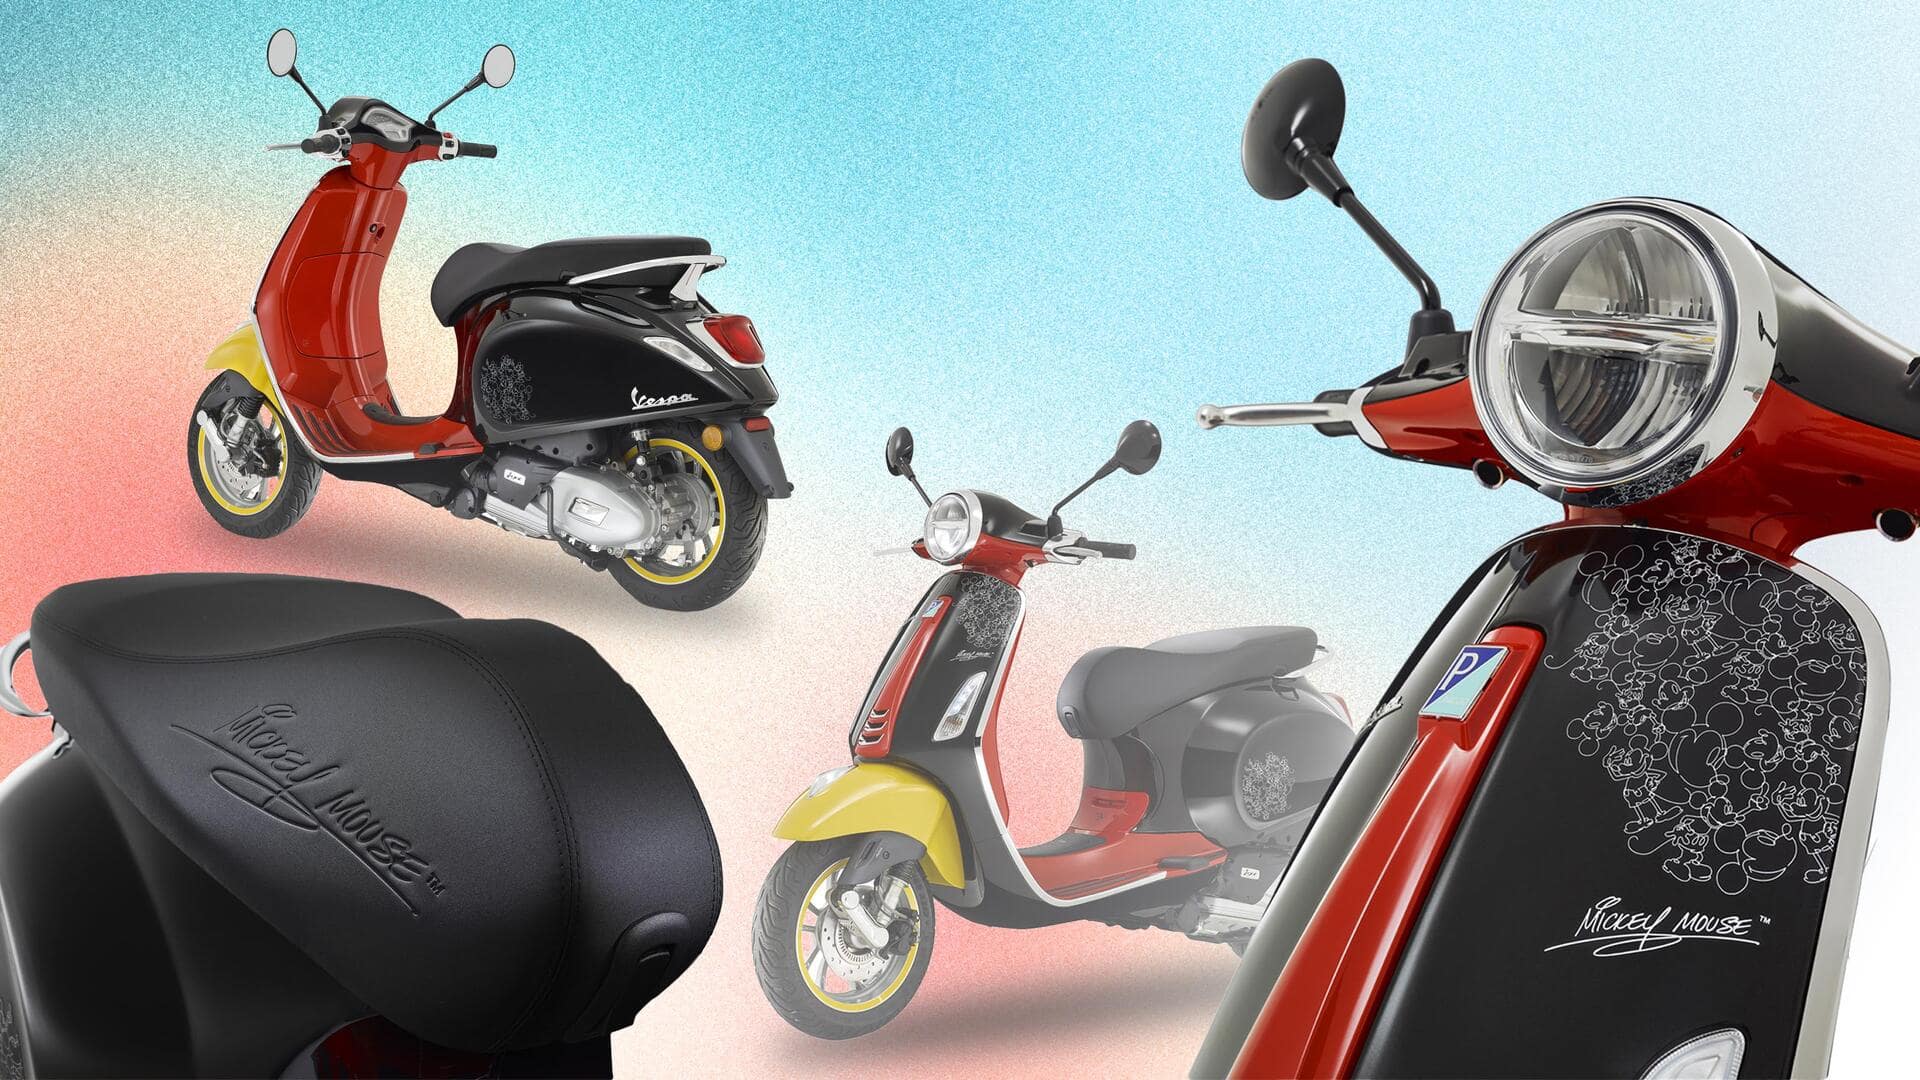 Mickey Mouse Edition by Vespa celebrates Disney's centennial: Check features